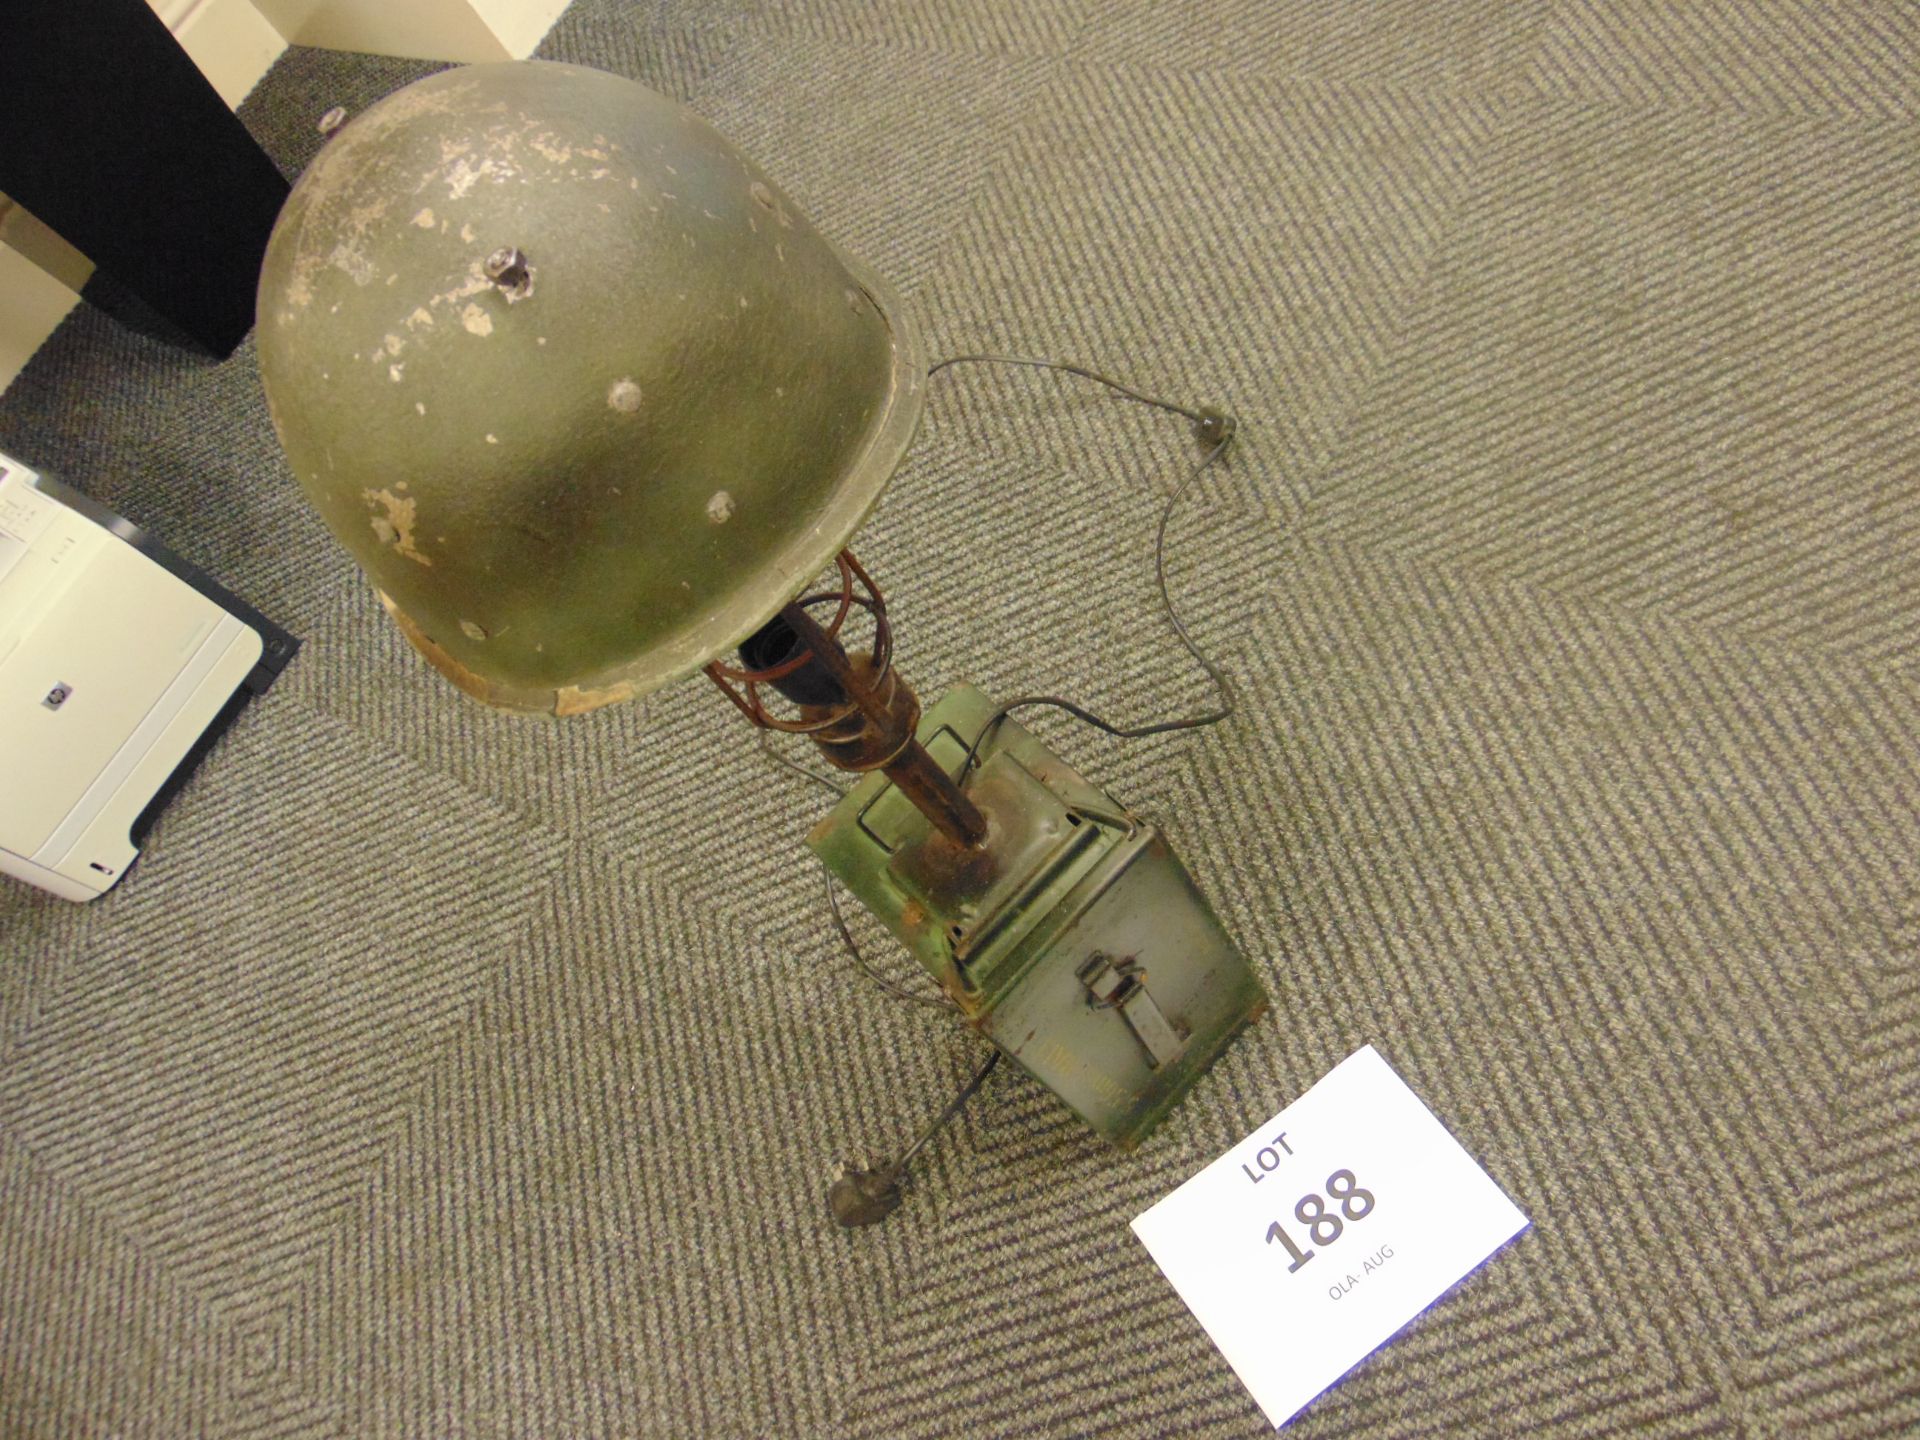 VERY UNUSUAL TABLE LAMP MADE FROM STEEL COMBAT HELMET AMNO BOX ETC - Image 2 of 7